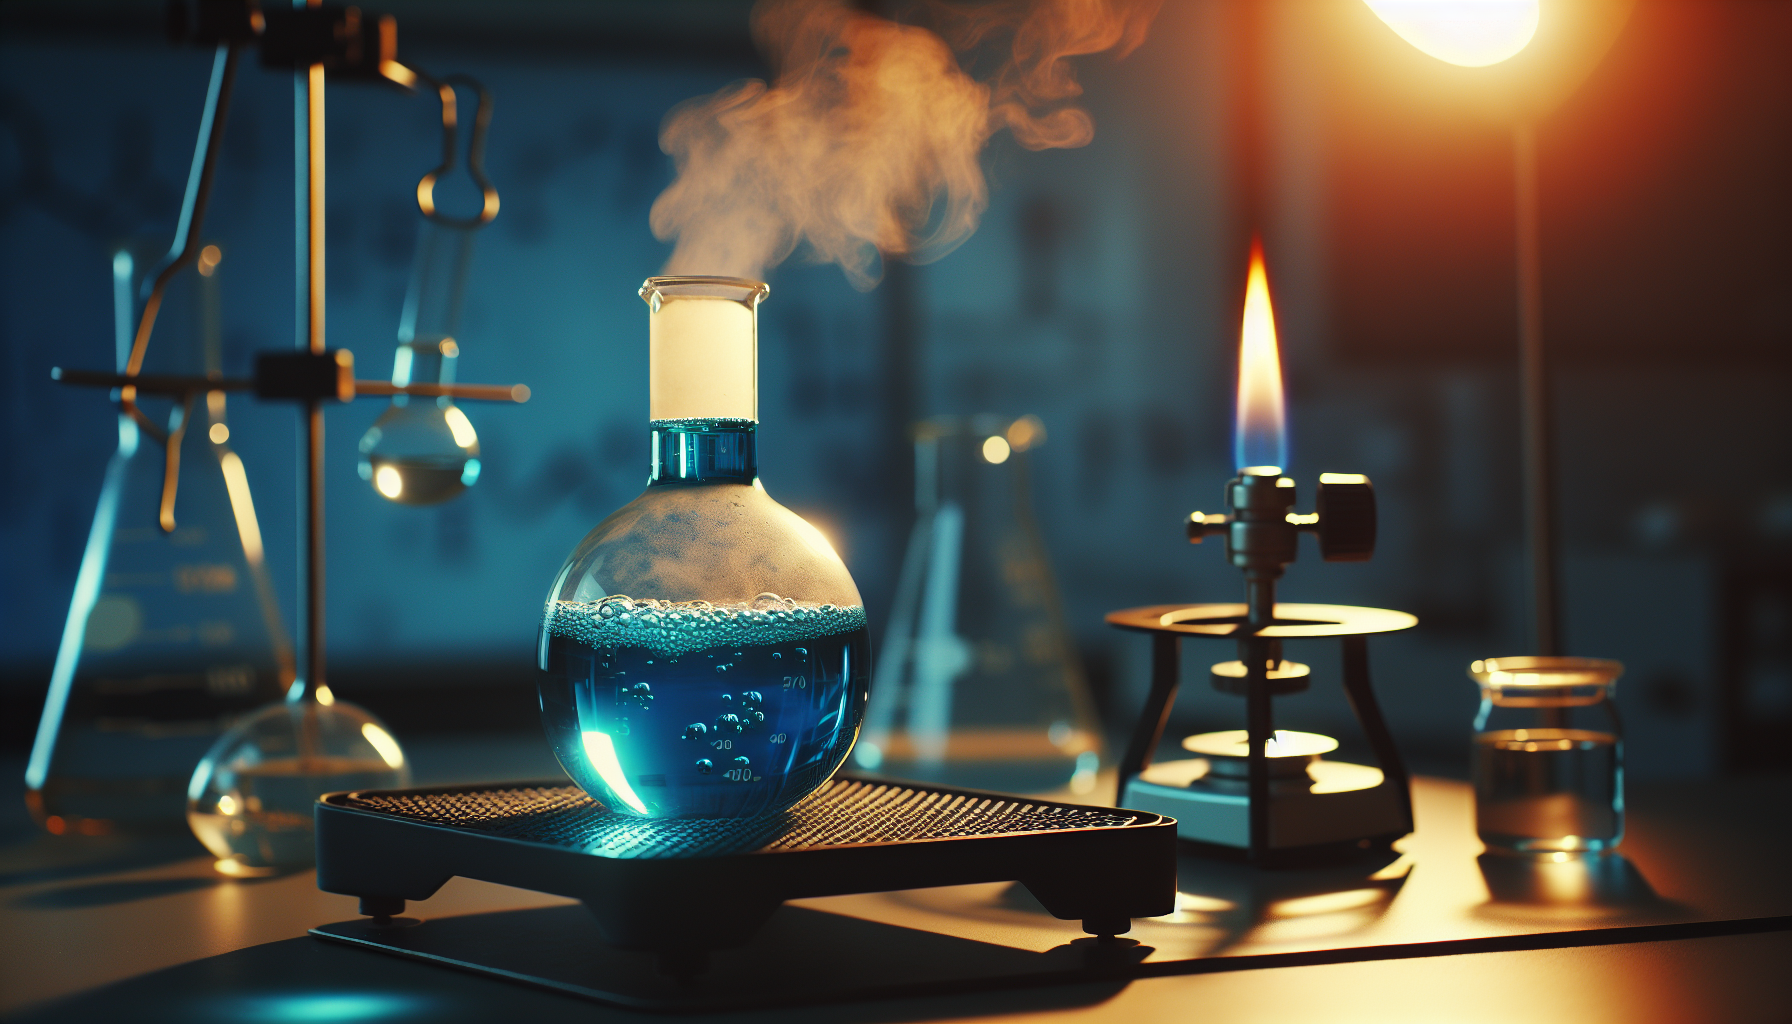 Erlenmeyer flask and Bunsen burner used for heating and mixing solutions